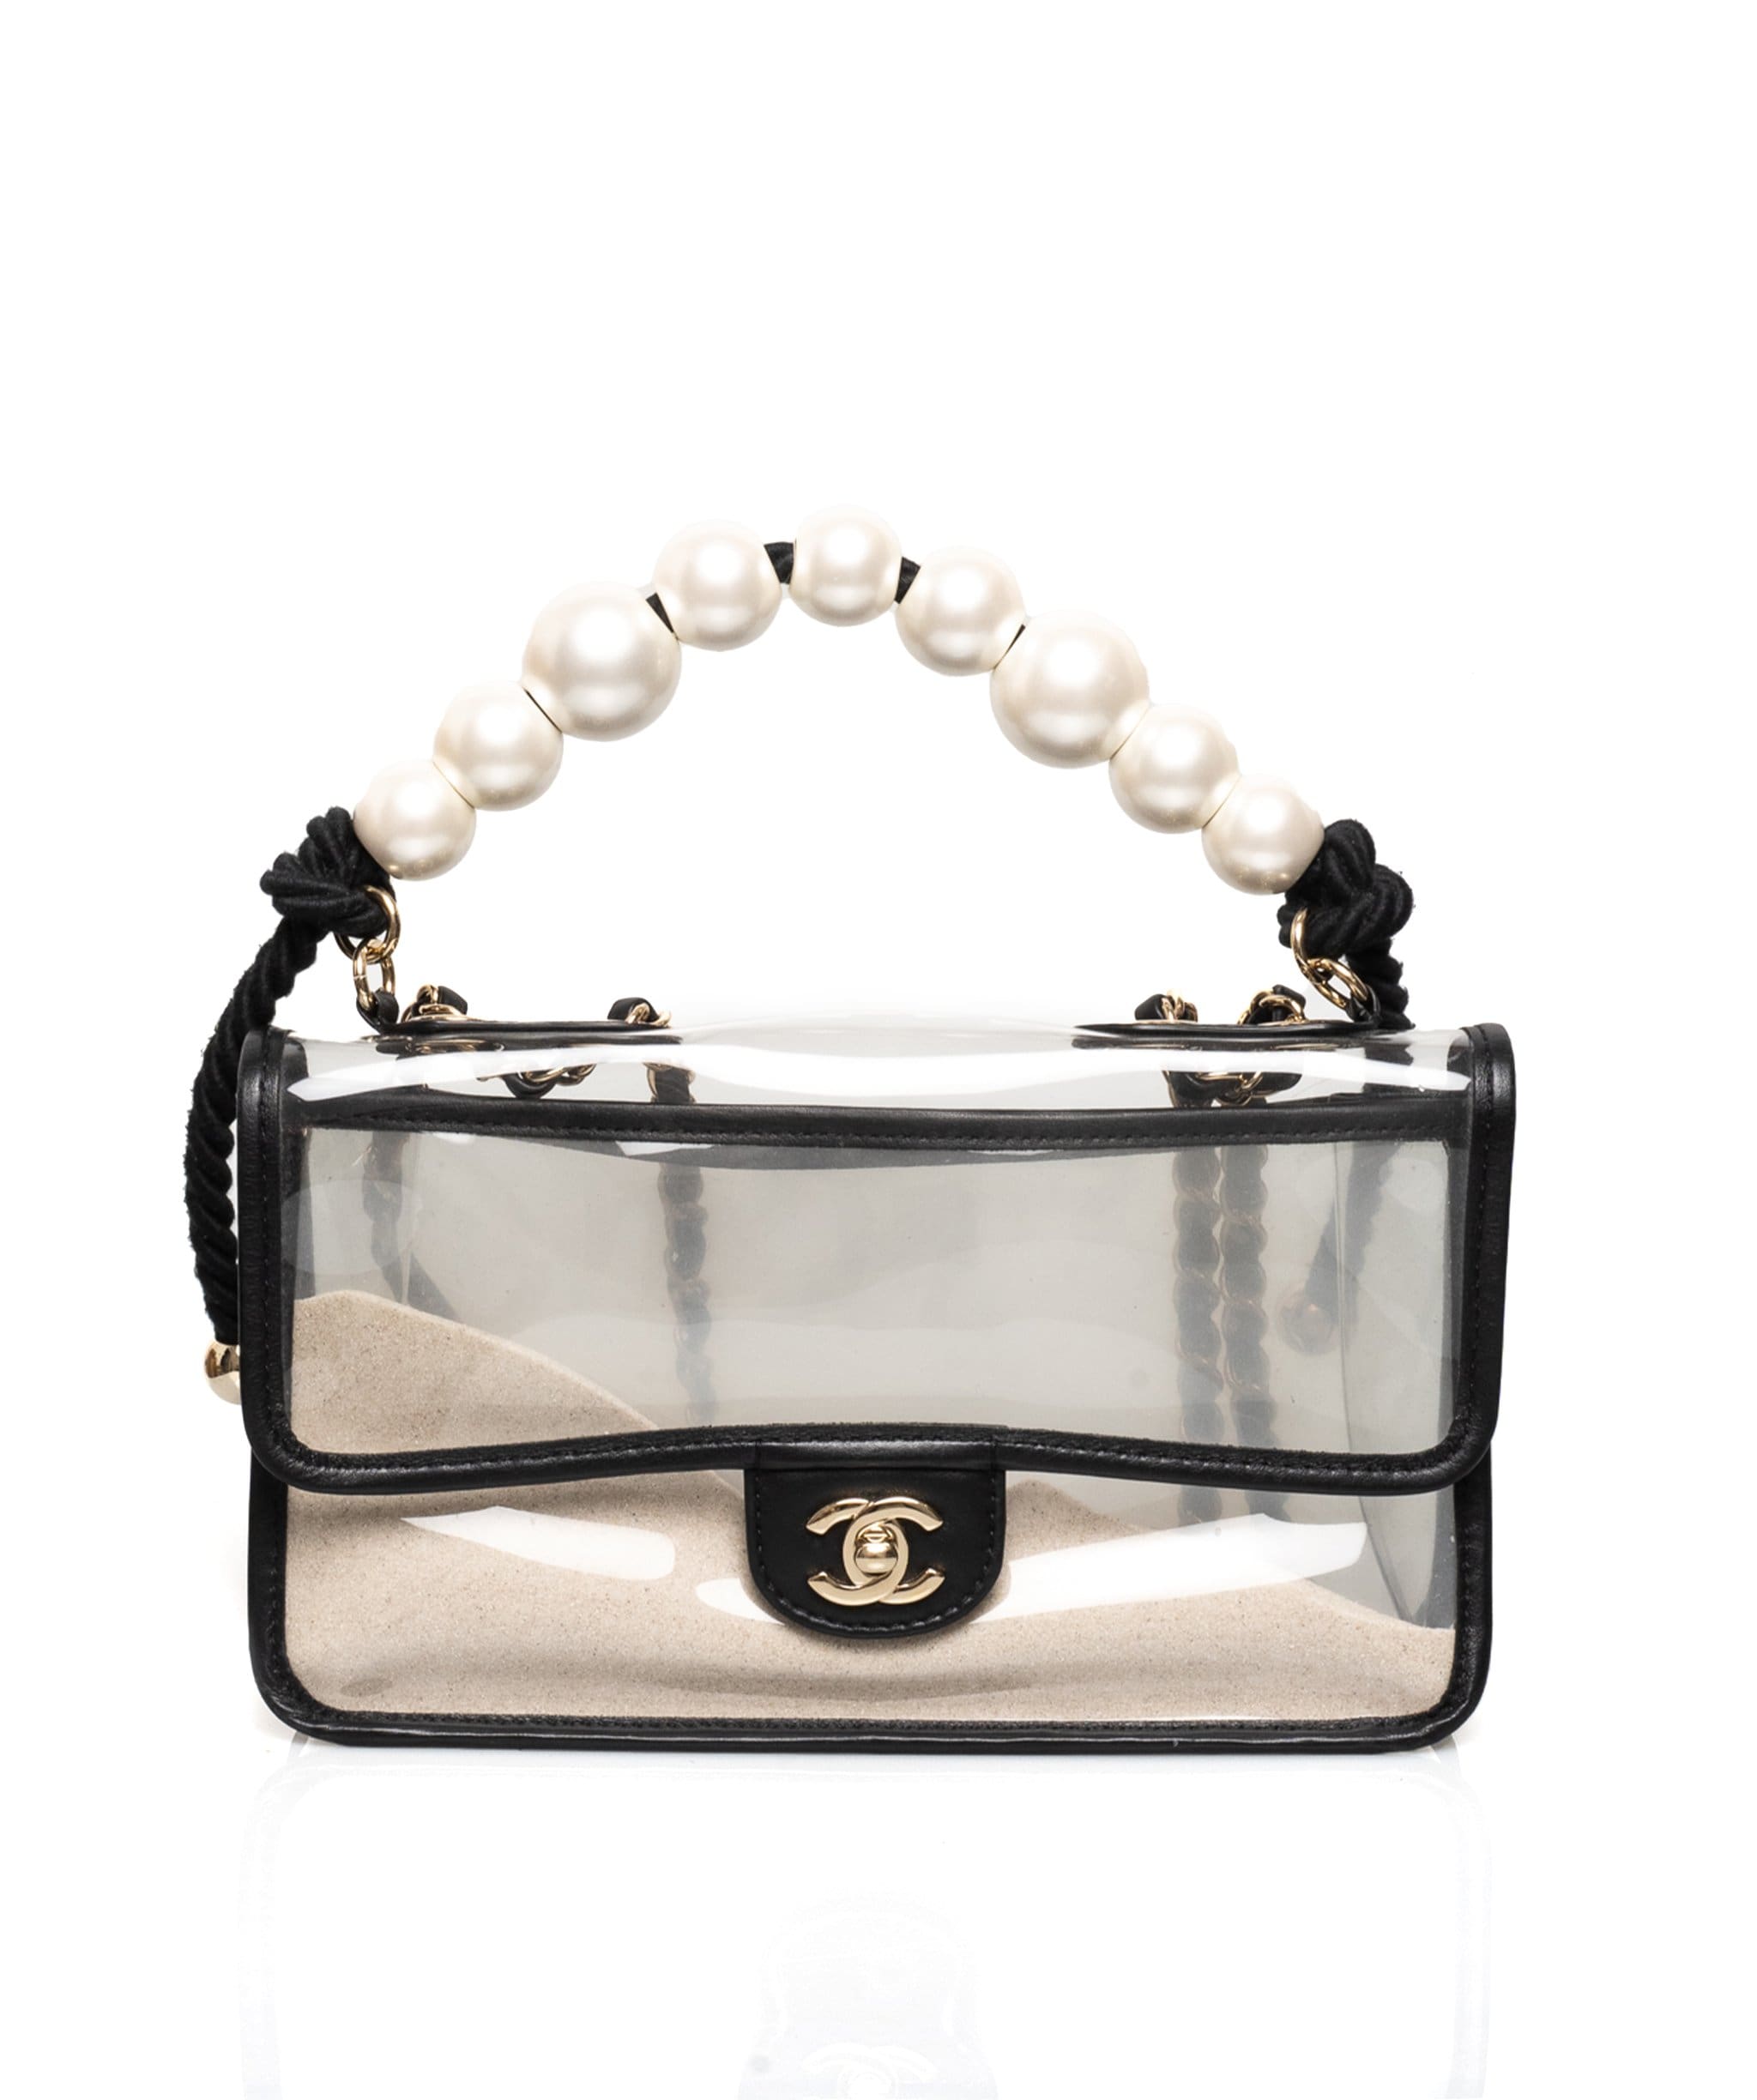 Chanel Sand By the Sea Limited Edition Flap with Gold Hardware - ASL1535